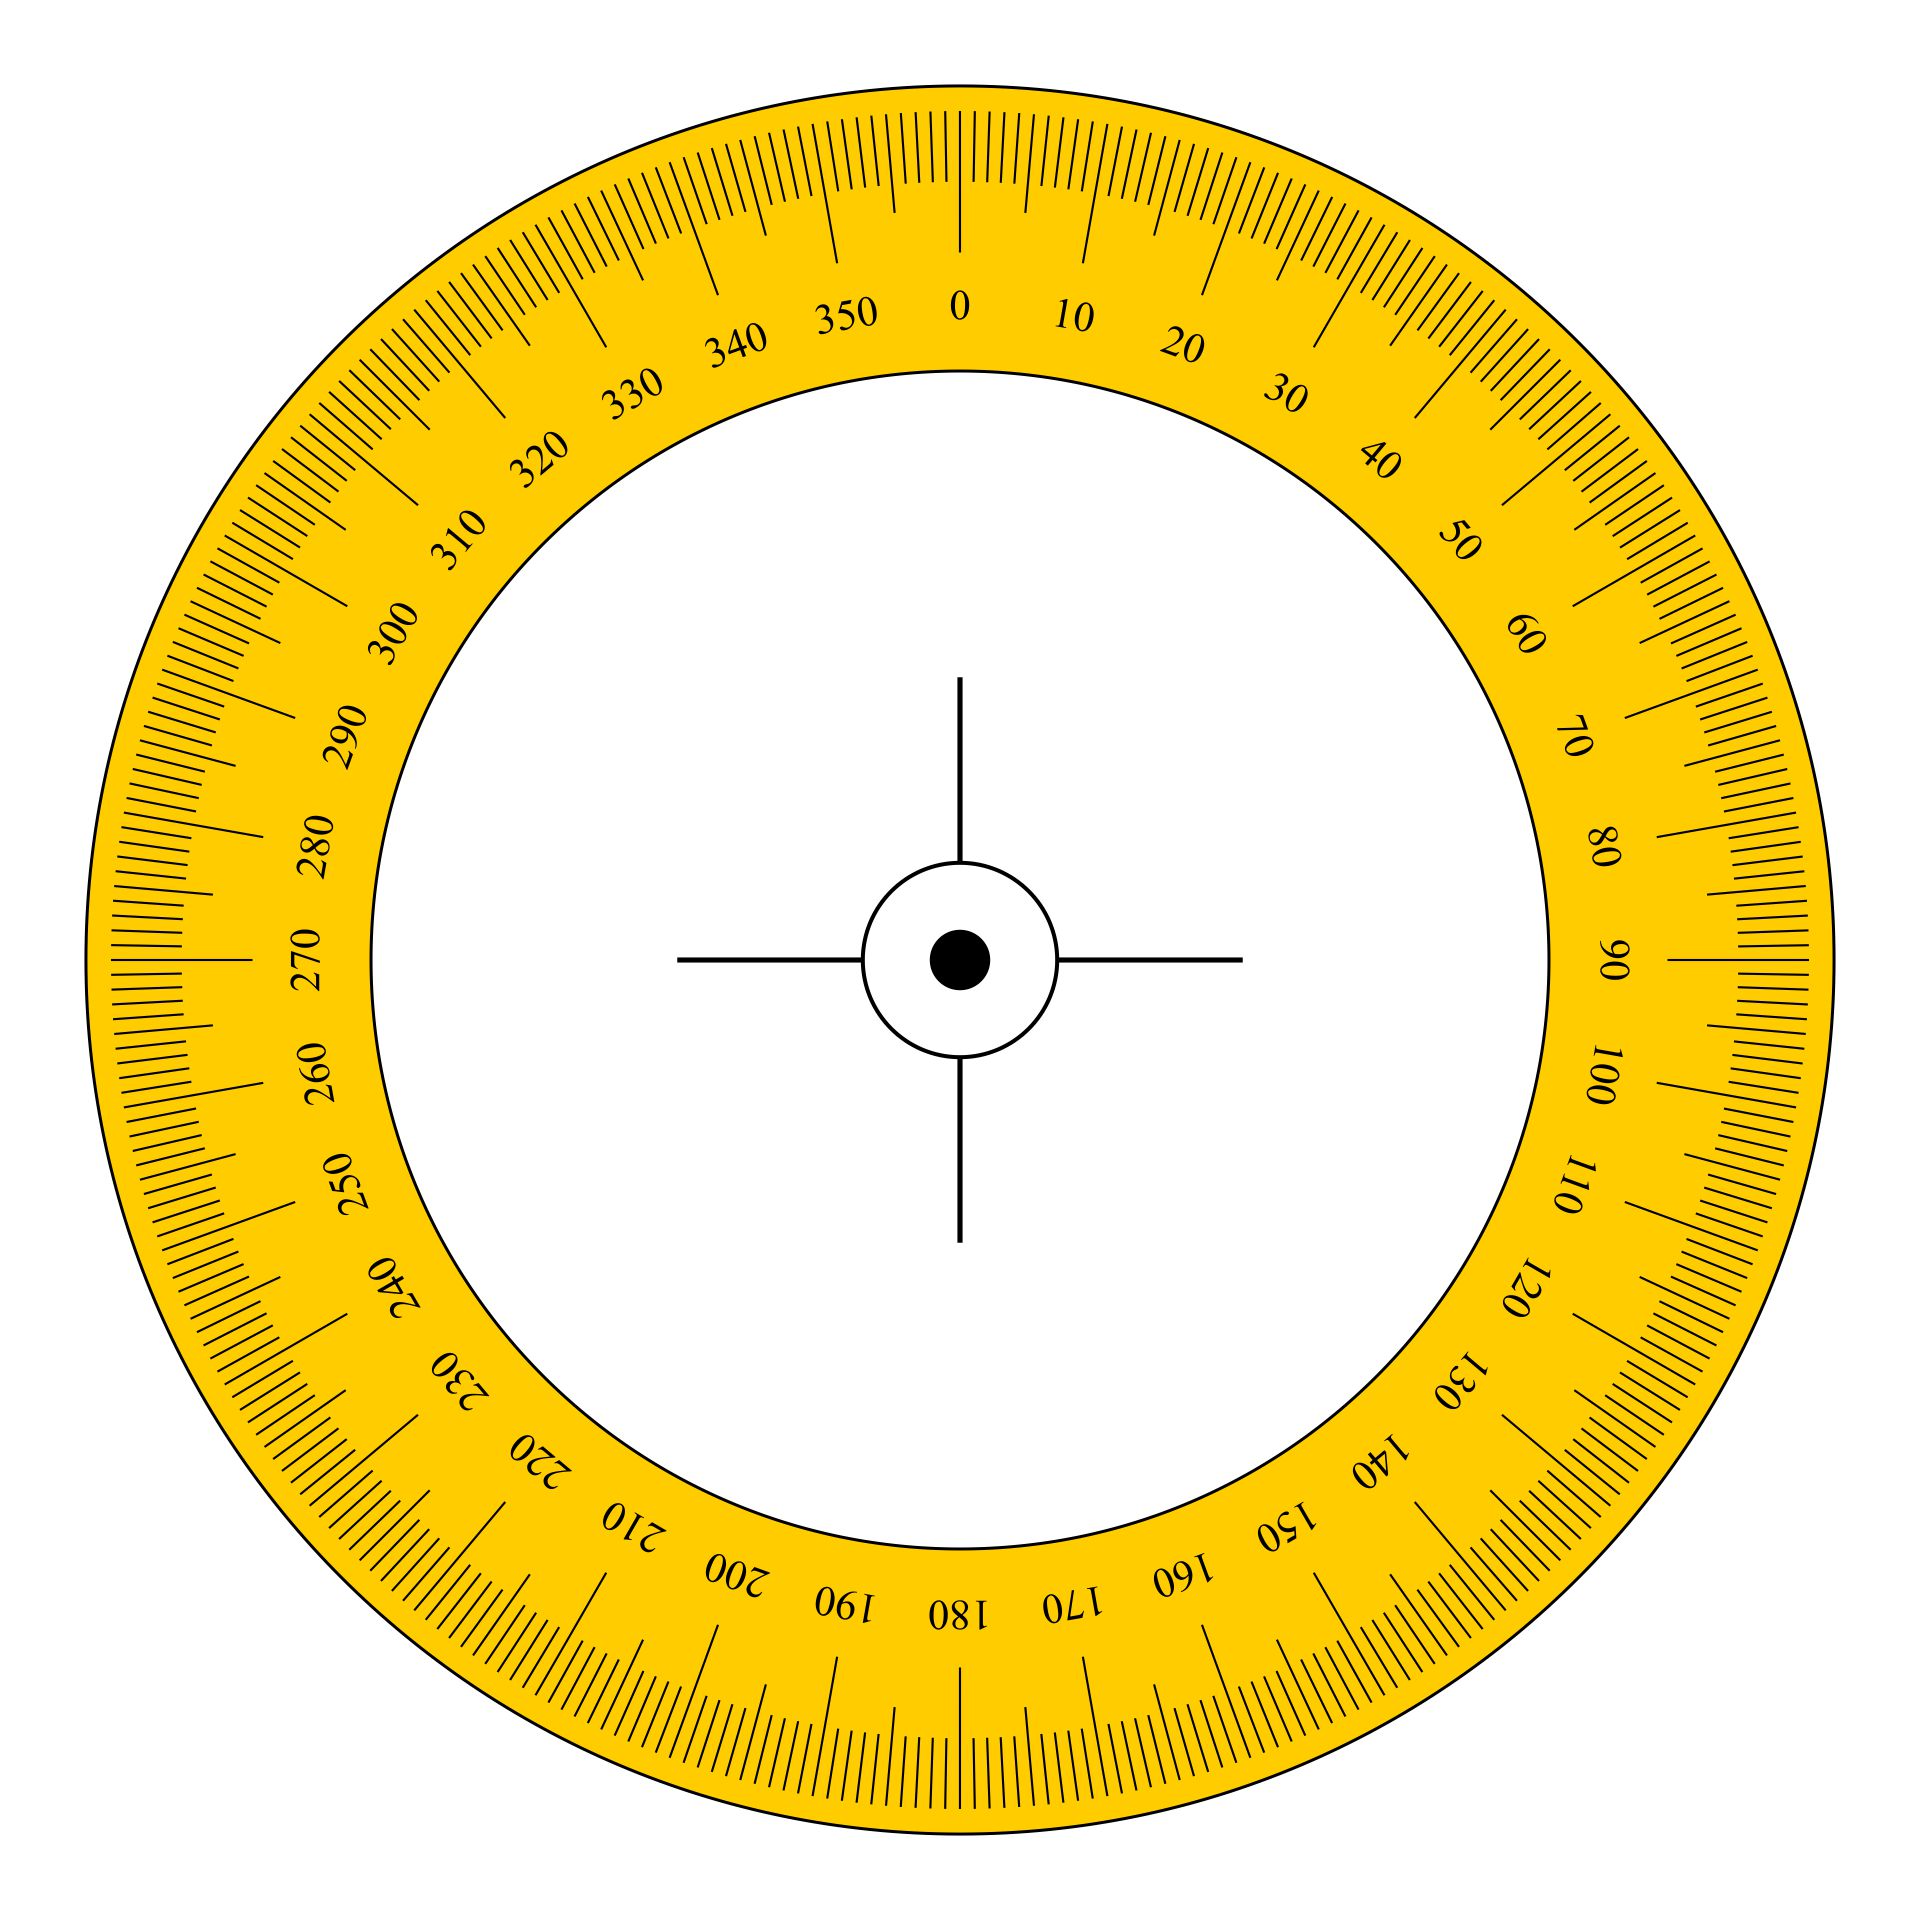 Full Circle Protractor Template